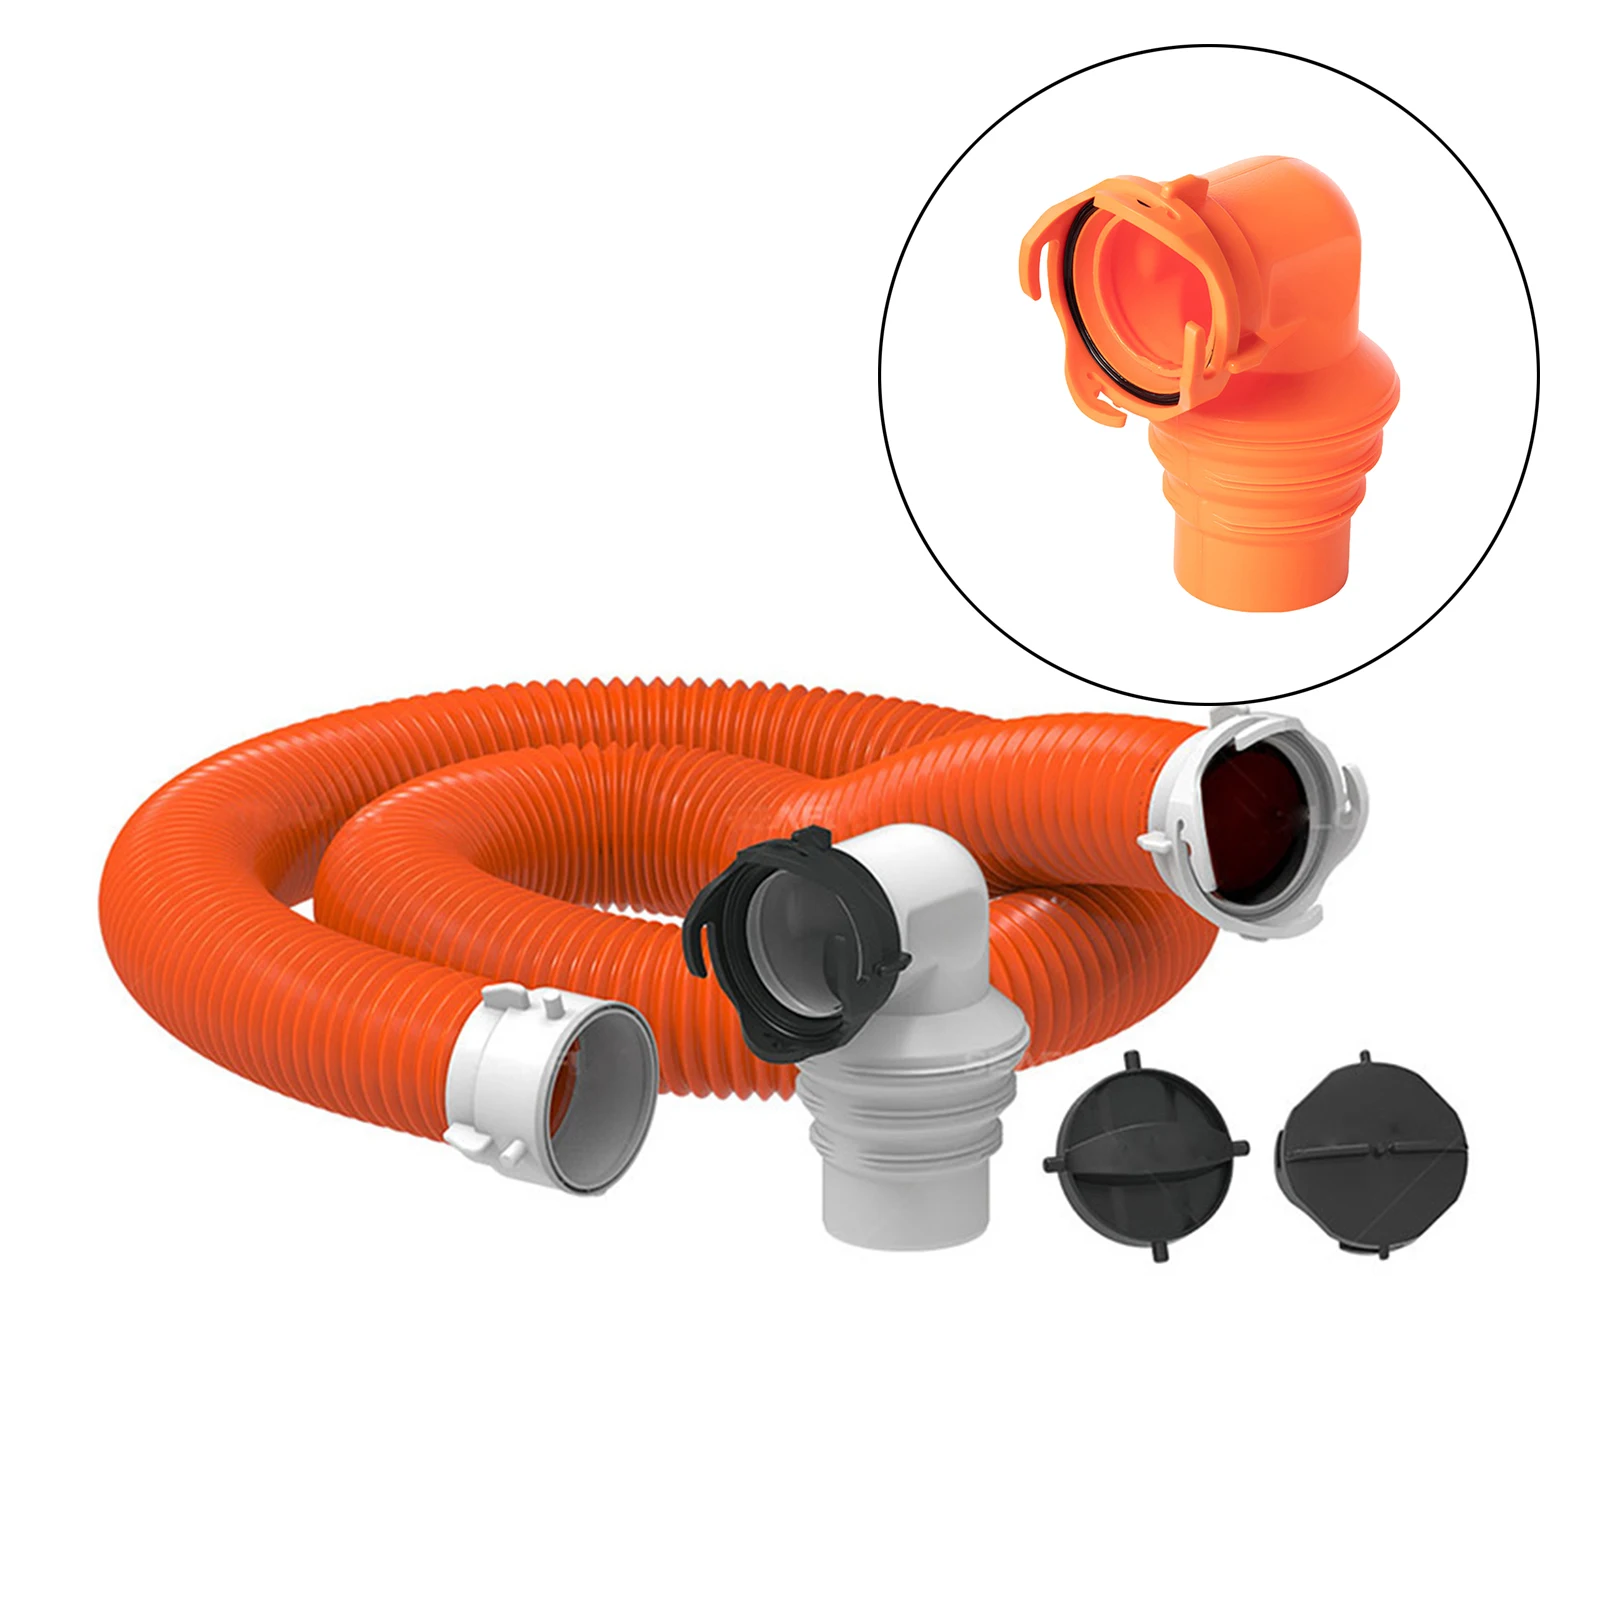 

90 Degree RV Sewer Hose Swivel Elbow Fitting Adapter for 3" 3-1/2" 4" Pipe Threads Orange